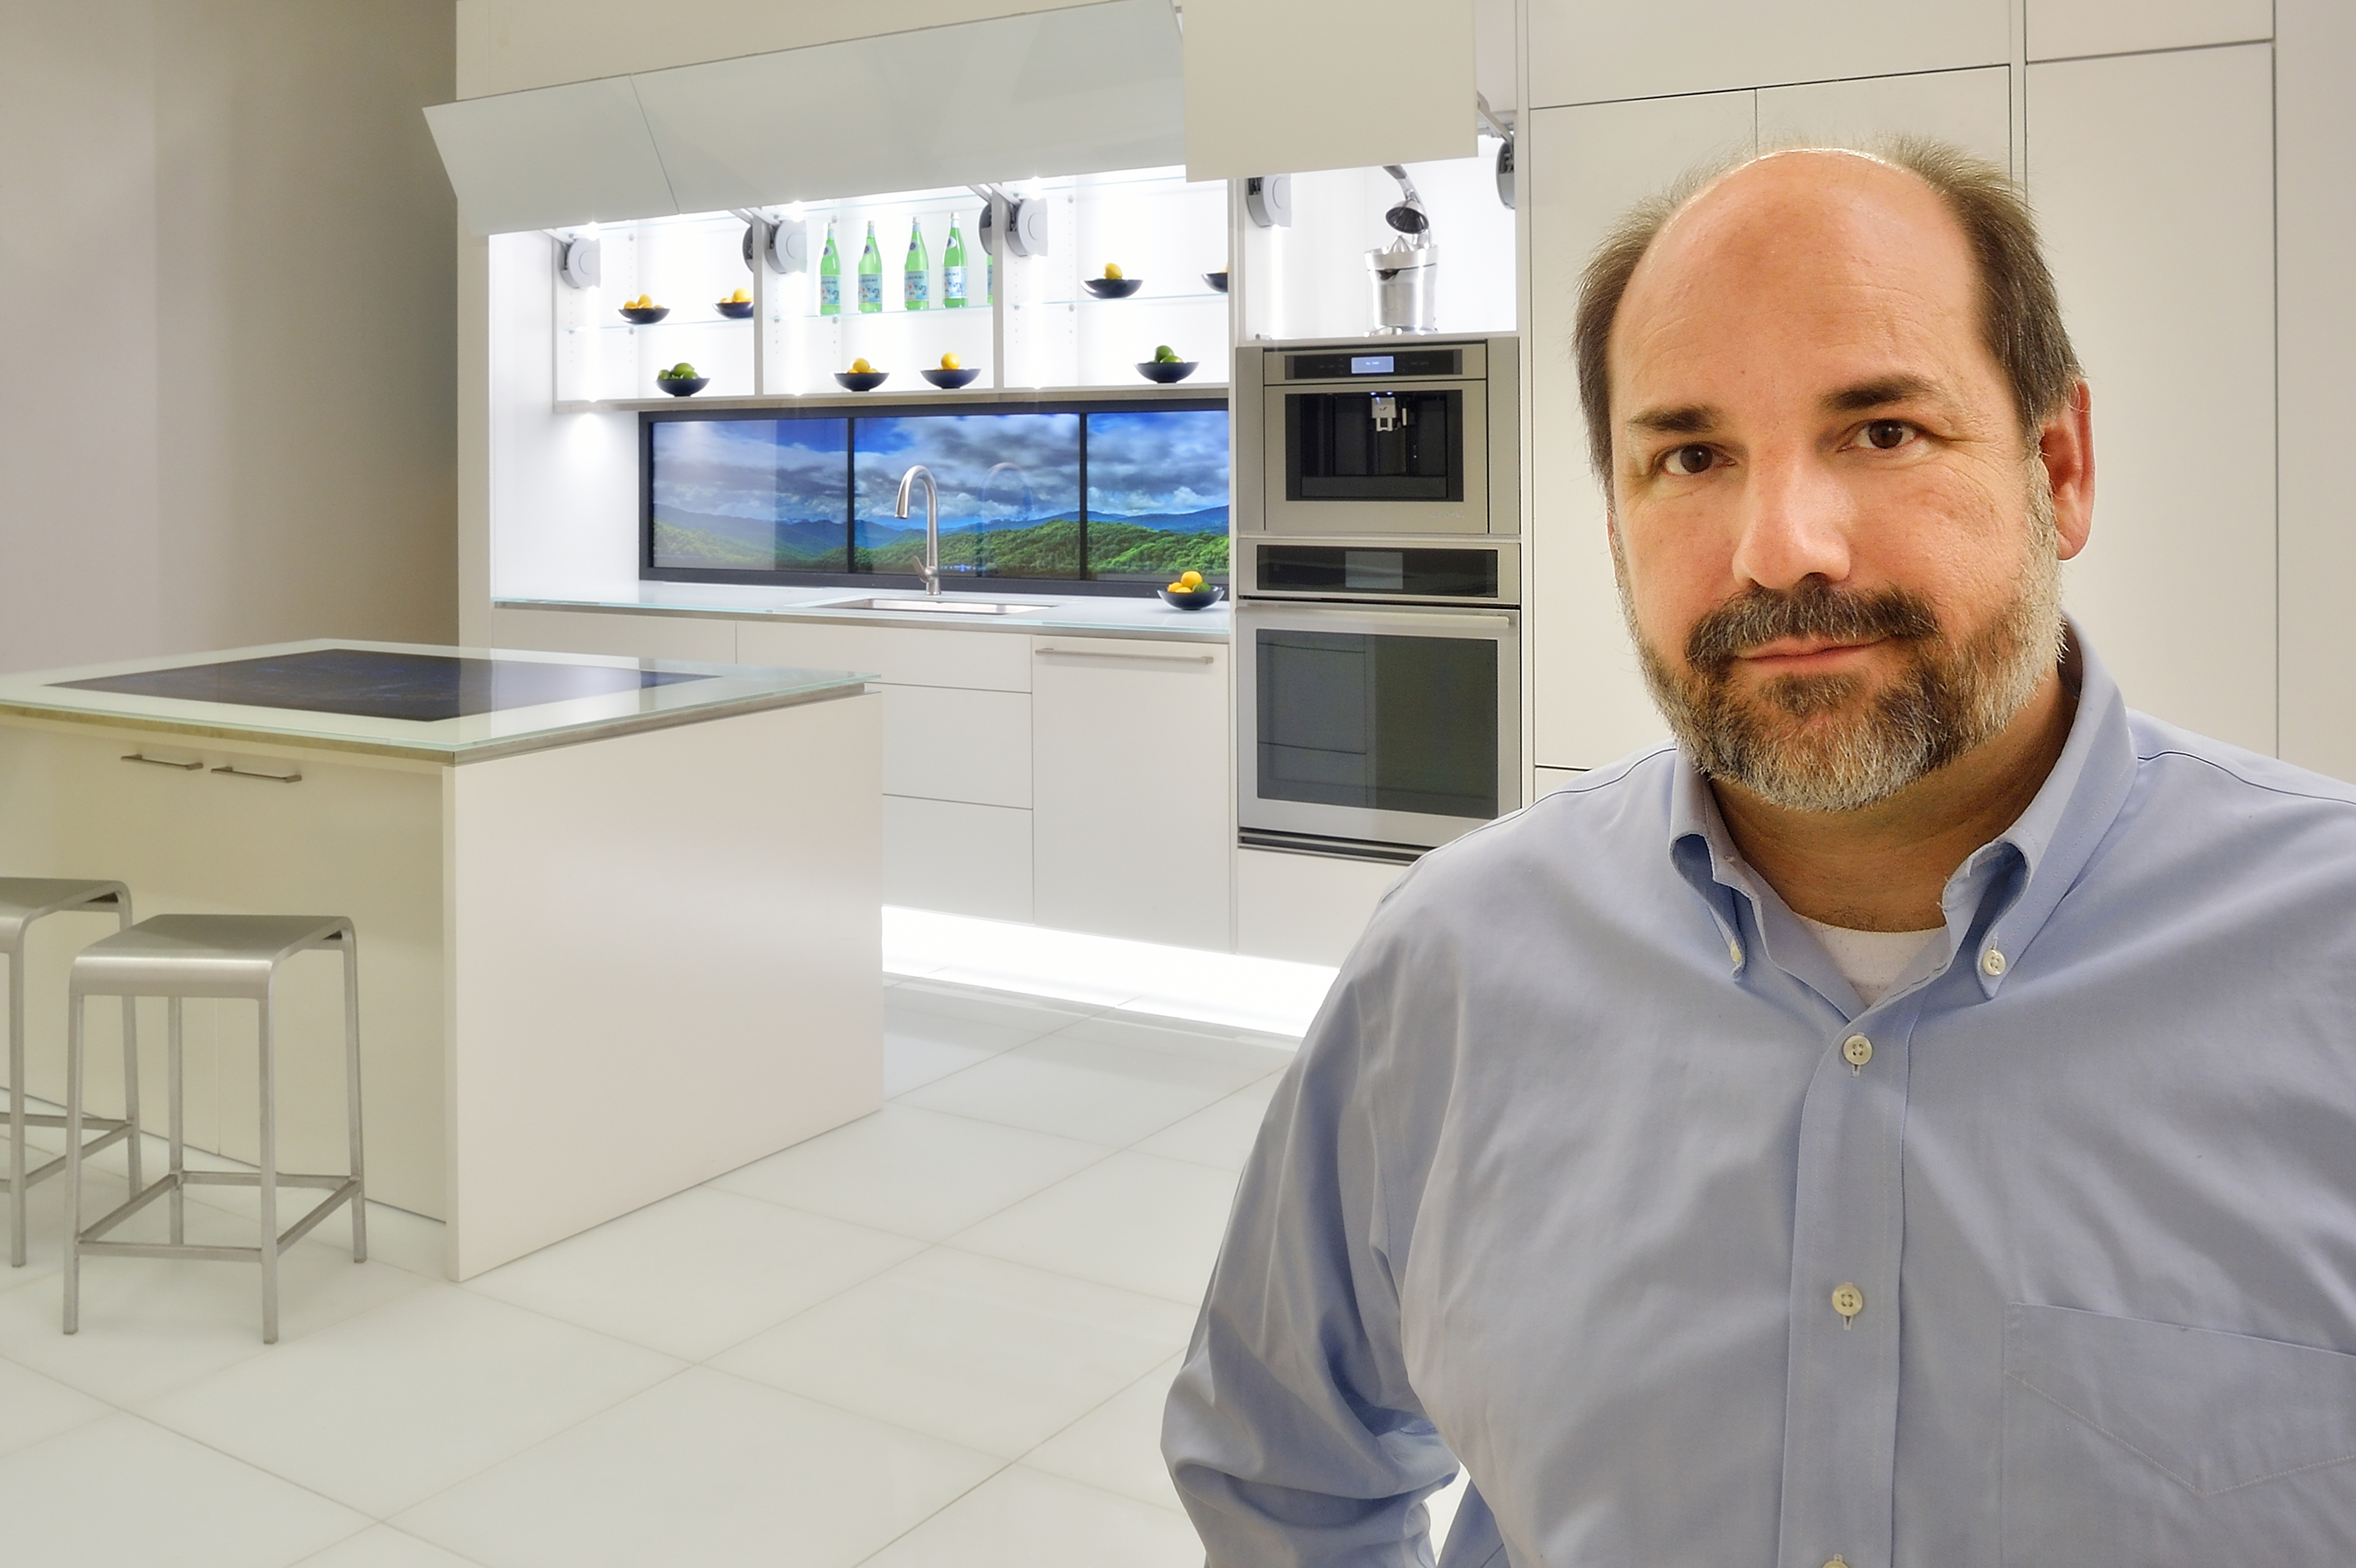 Joseph Wheeler stands in the foreground with a bright white kitchen with lighted cabinets in the background.